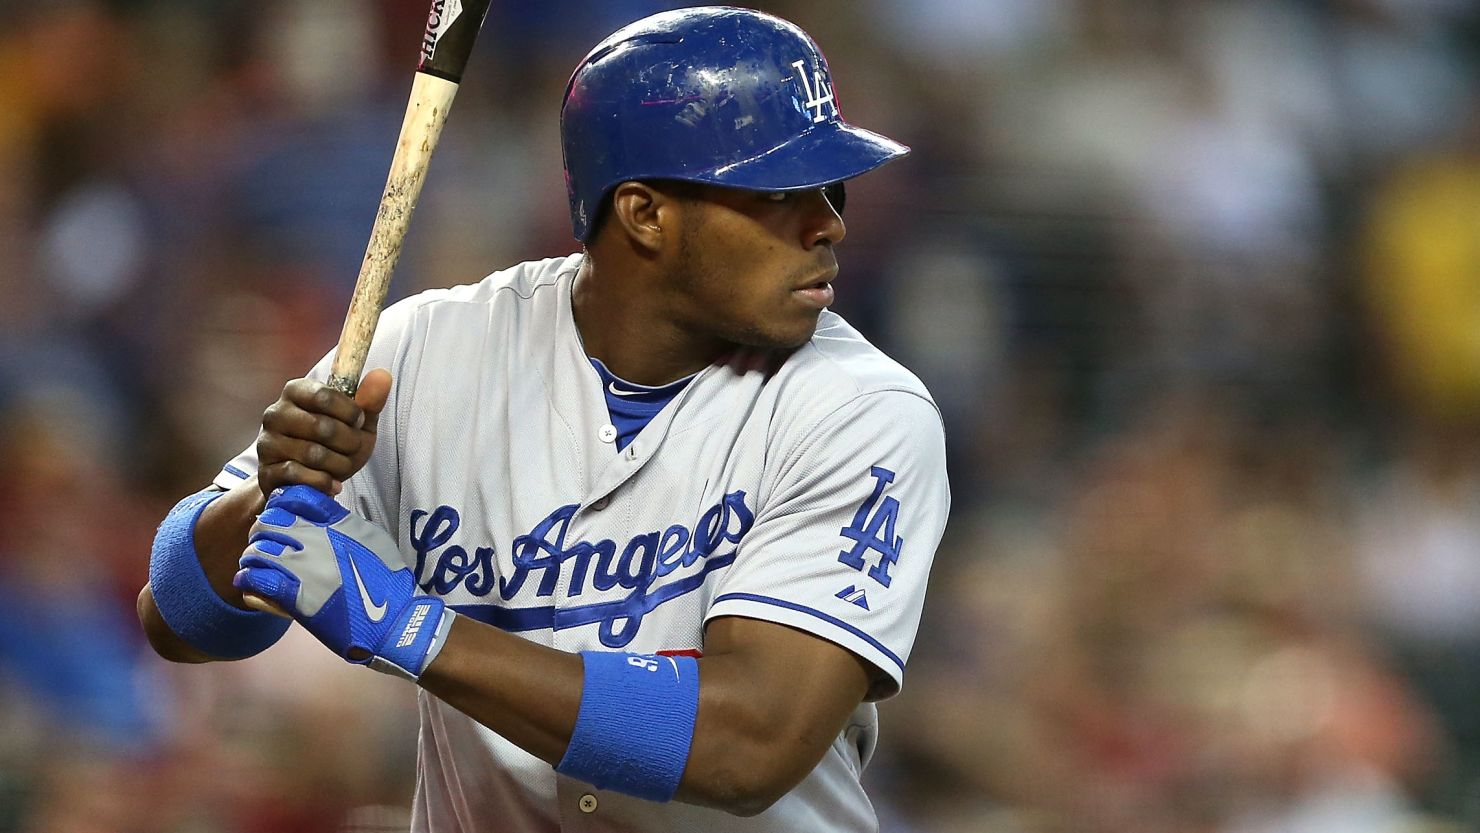 Los Angeles Dodgers' star Yasiel Puig defected from Cuba in 2012.